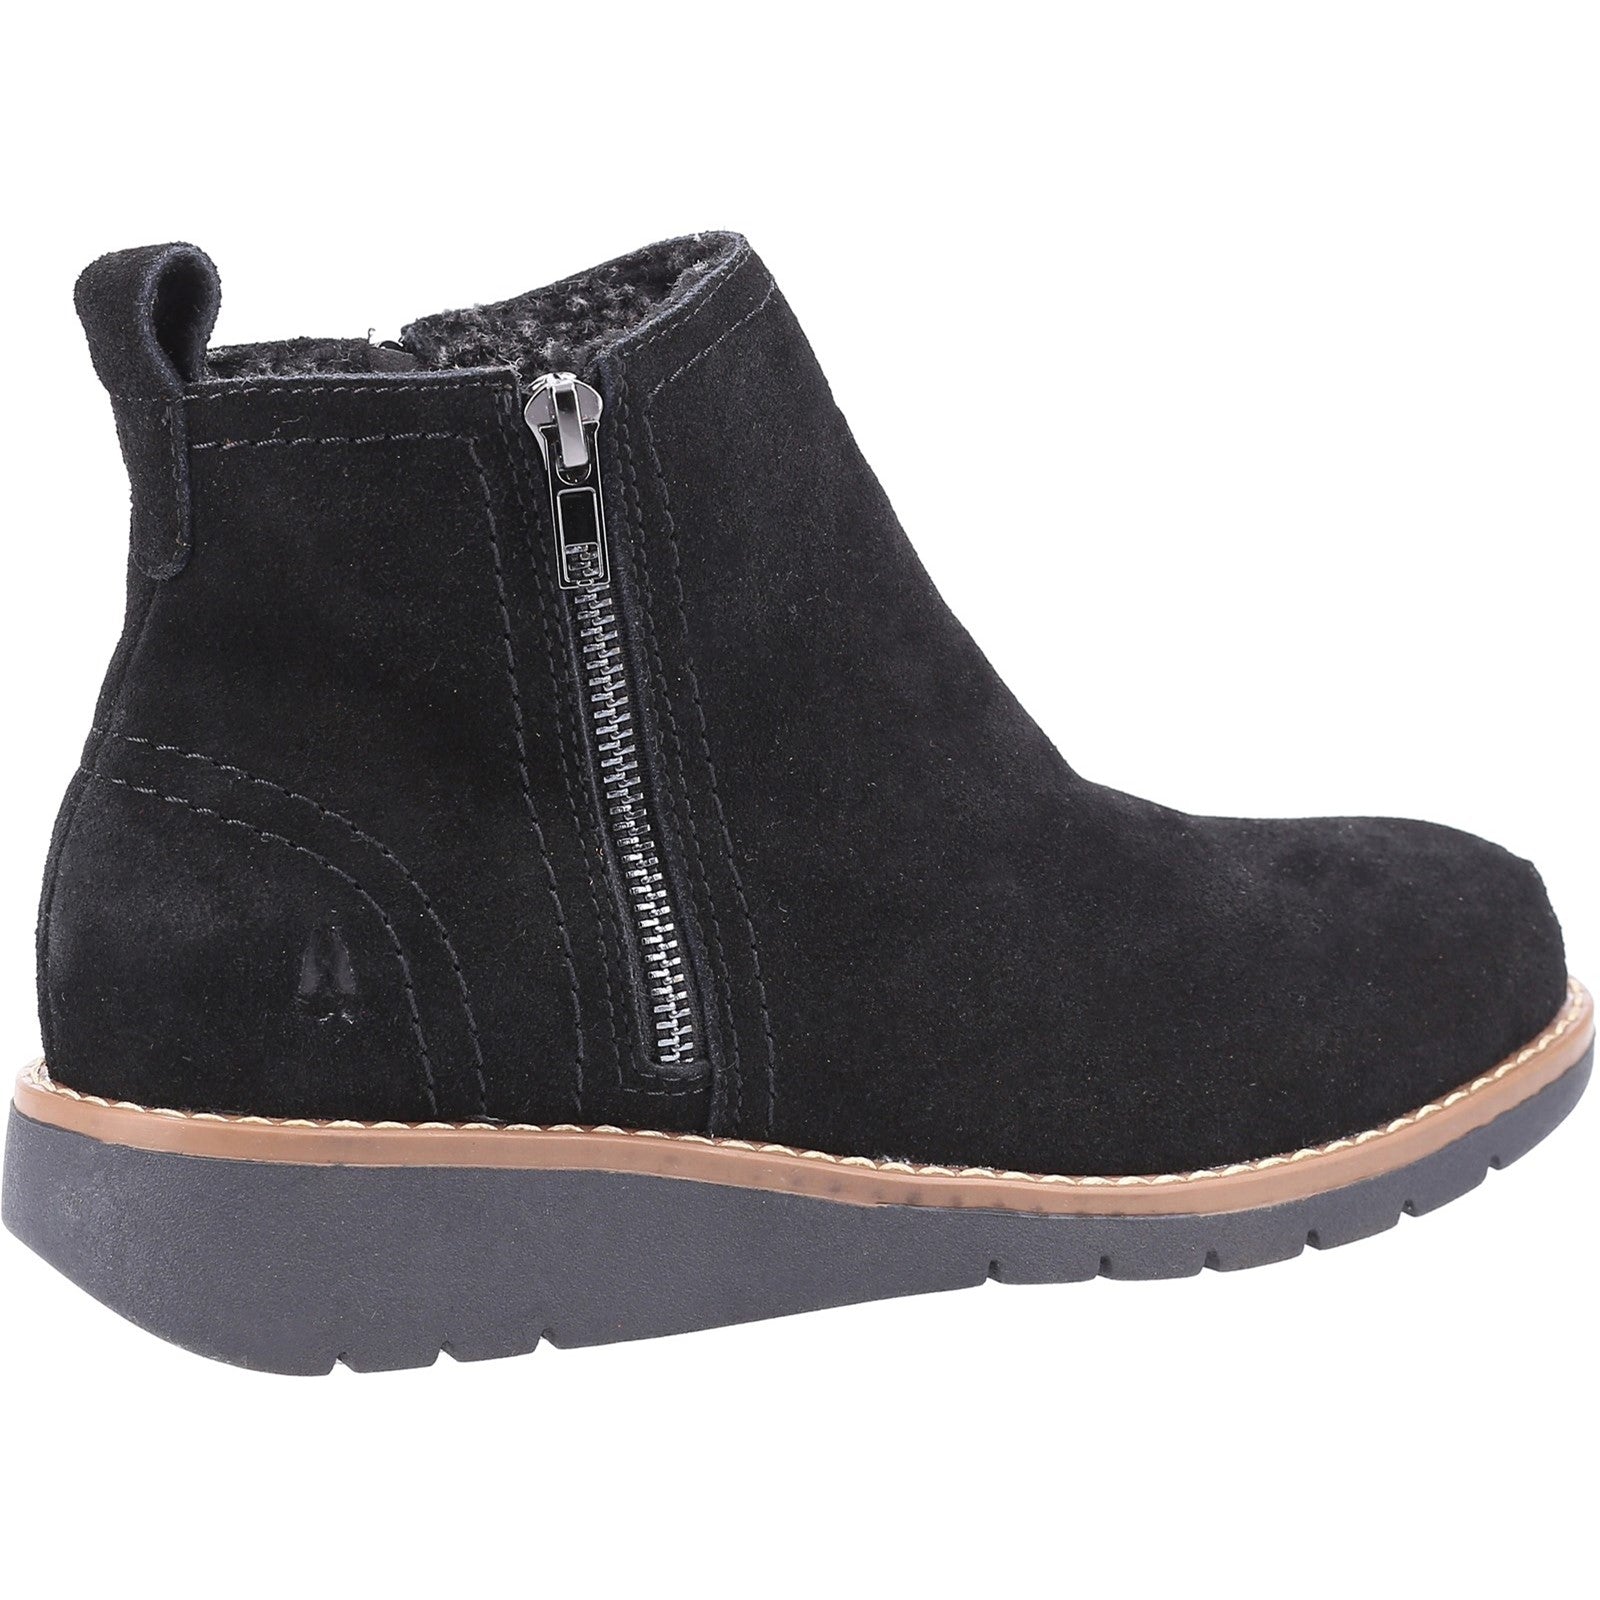 Hush Puppies Womens Libby Suede Boot - Black